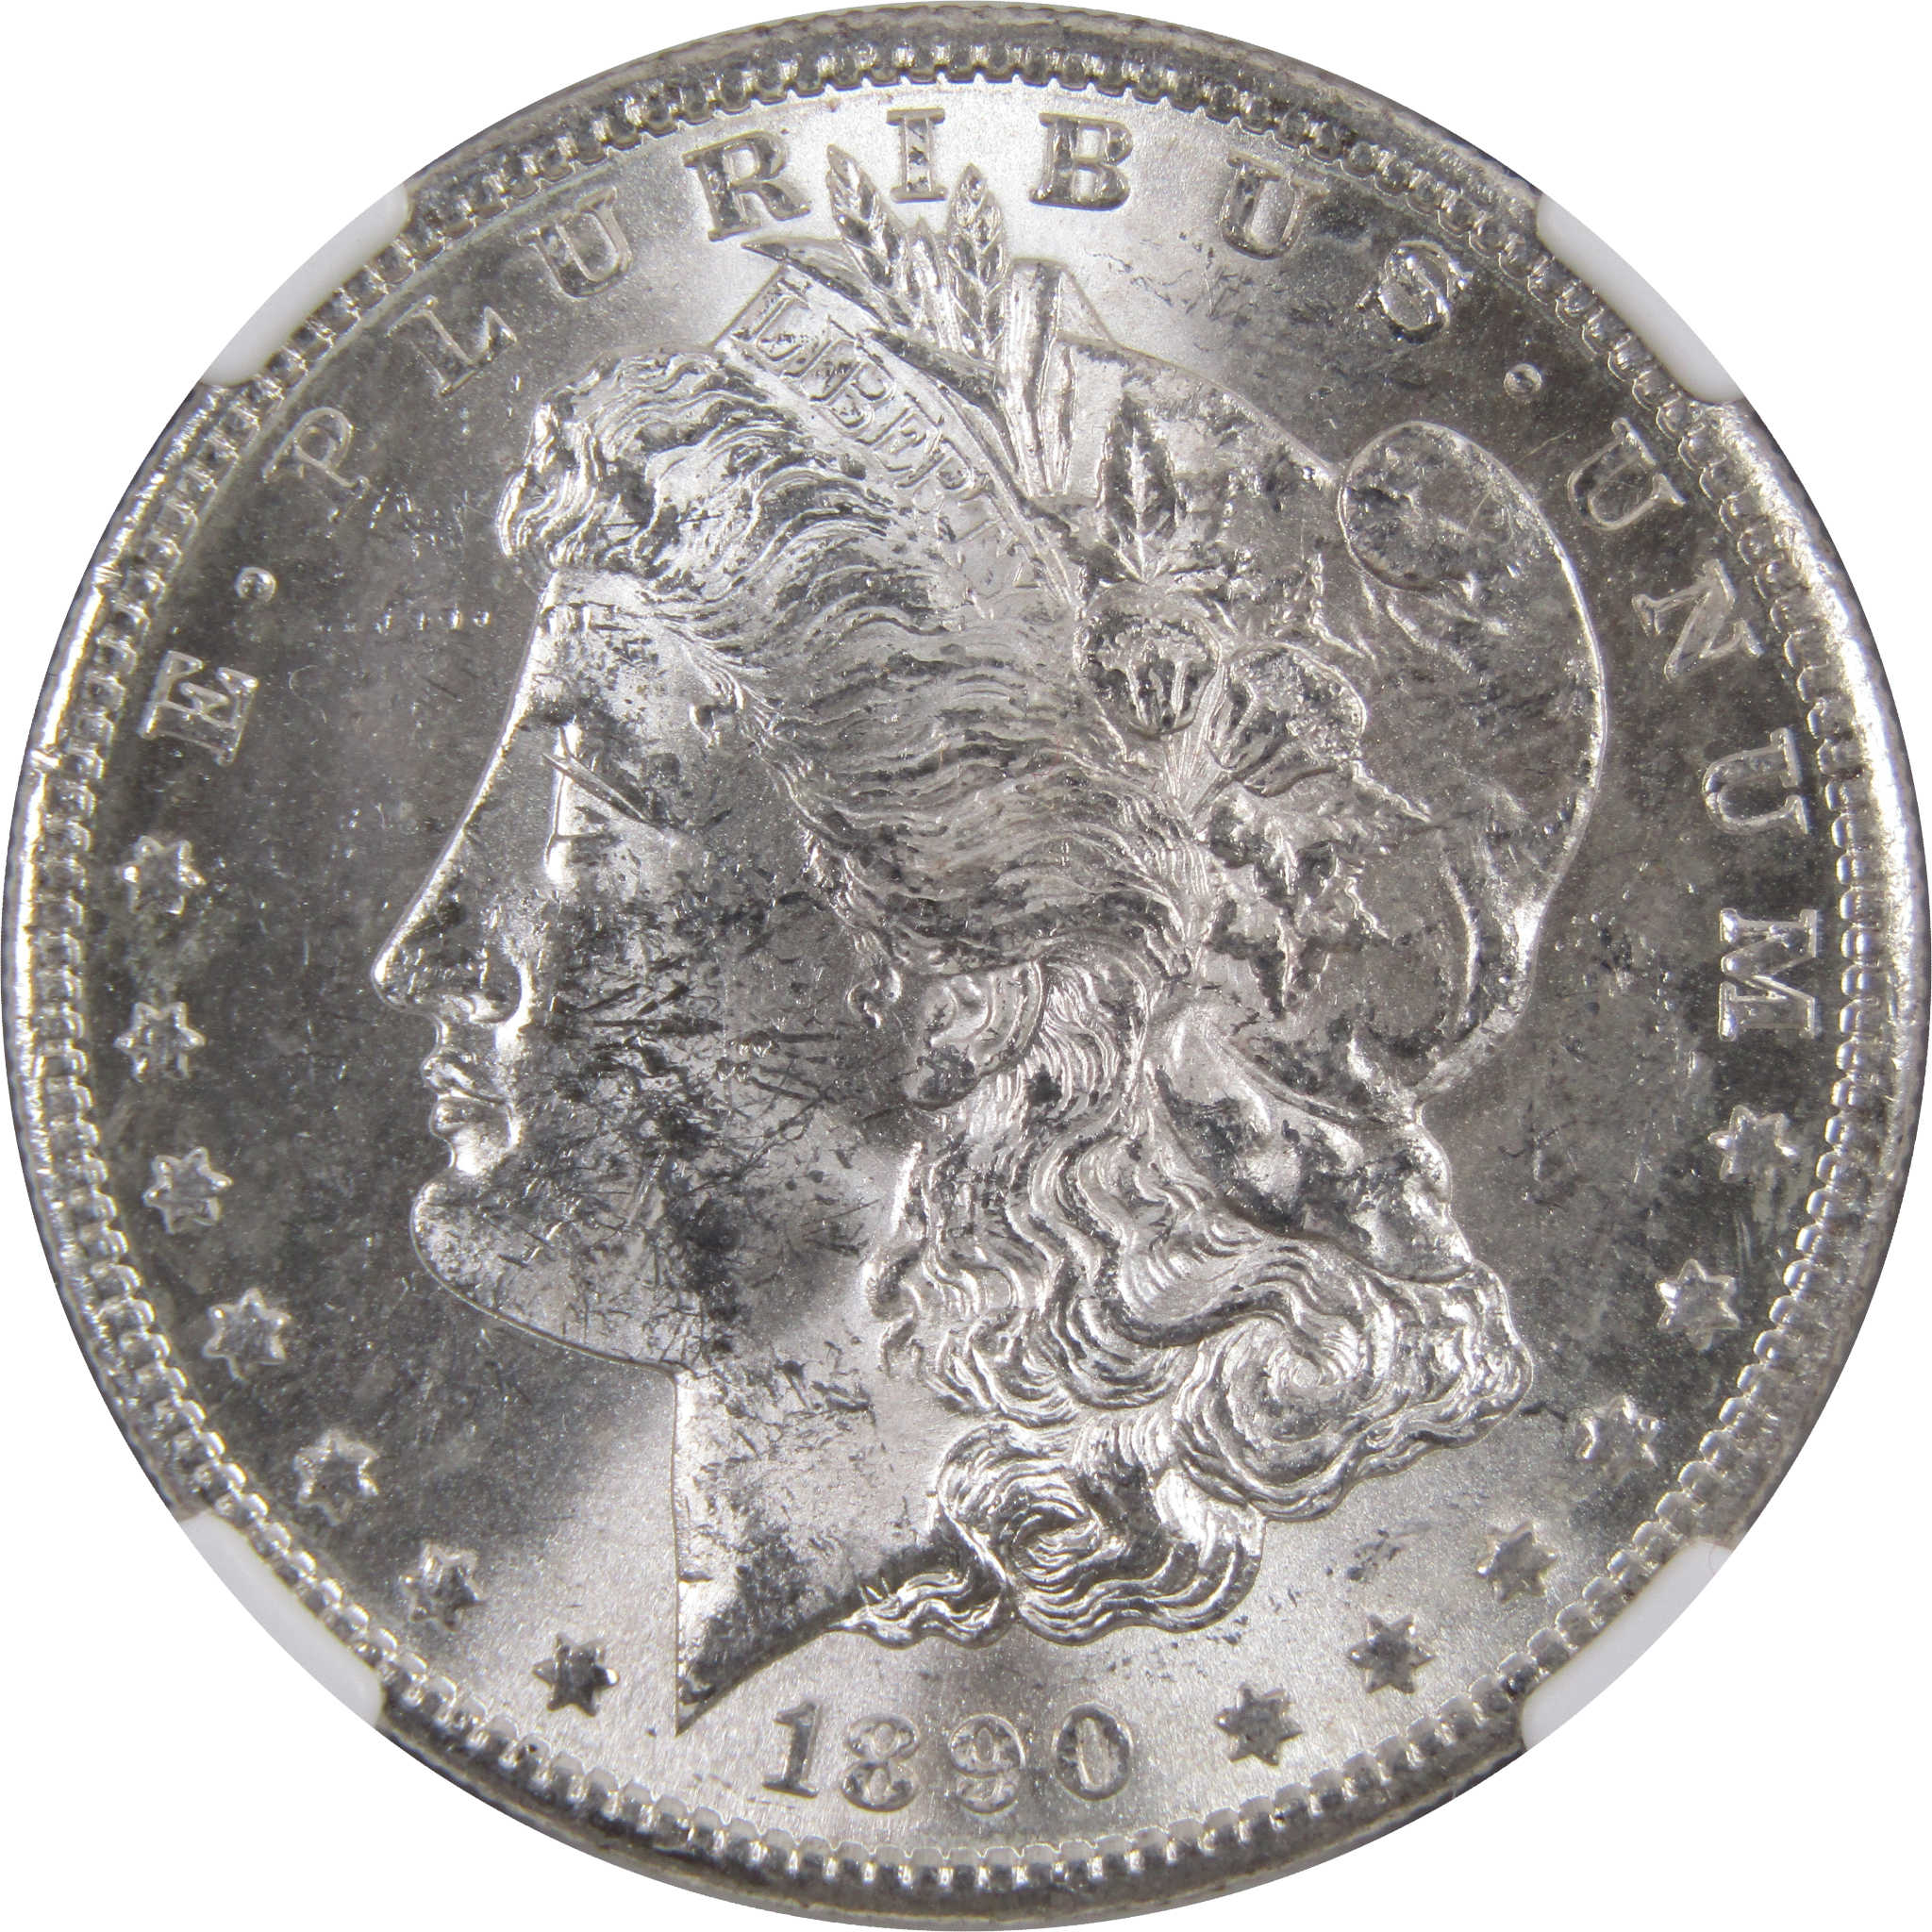 1890 S Morgan Dollar MS 61 NGC 90% Silver Uncirculated SKU:I3102 - Morgan coin - Morgan silver dollar - Morgan silver dollar for sale - Profile Coins &amp; Collectibles